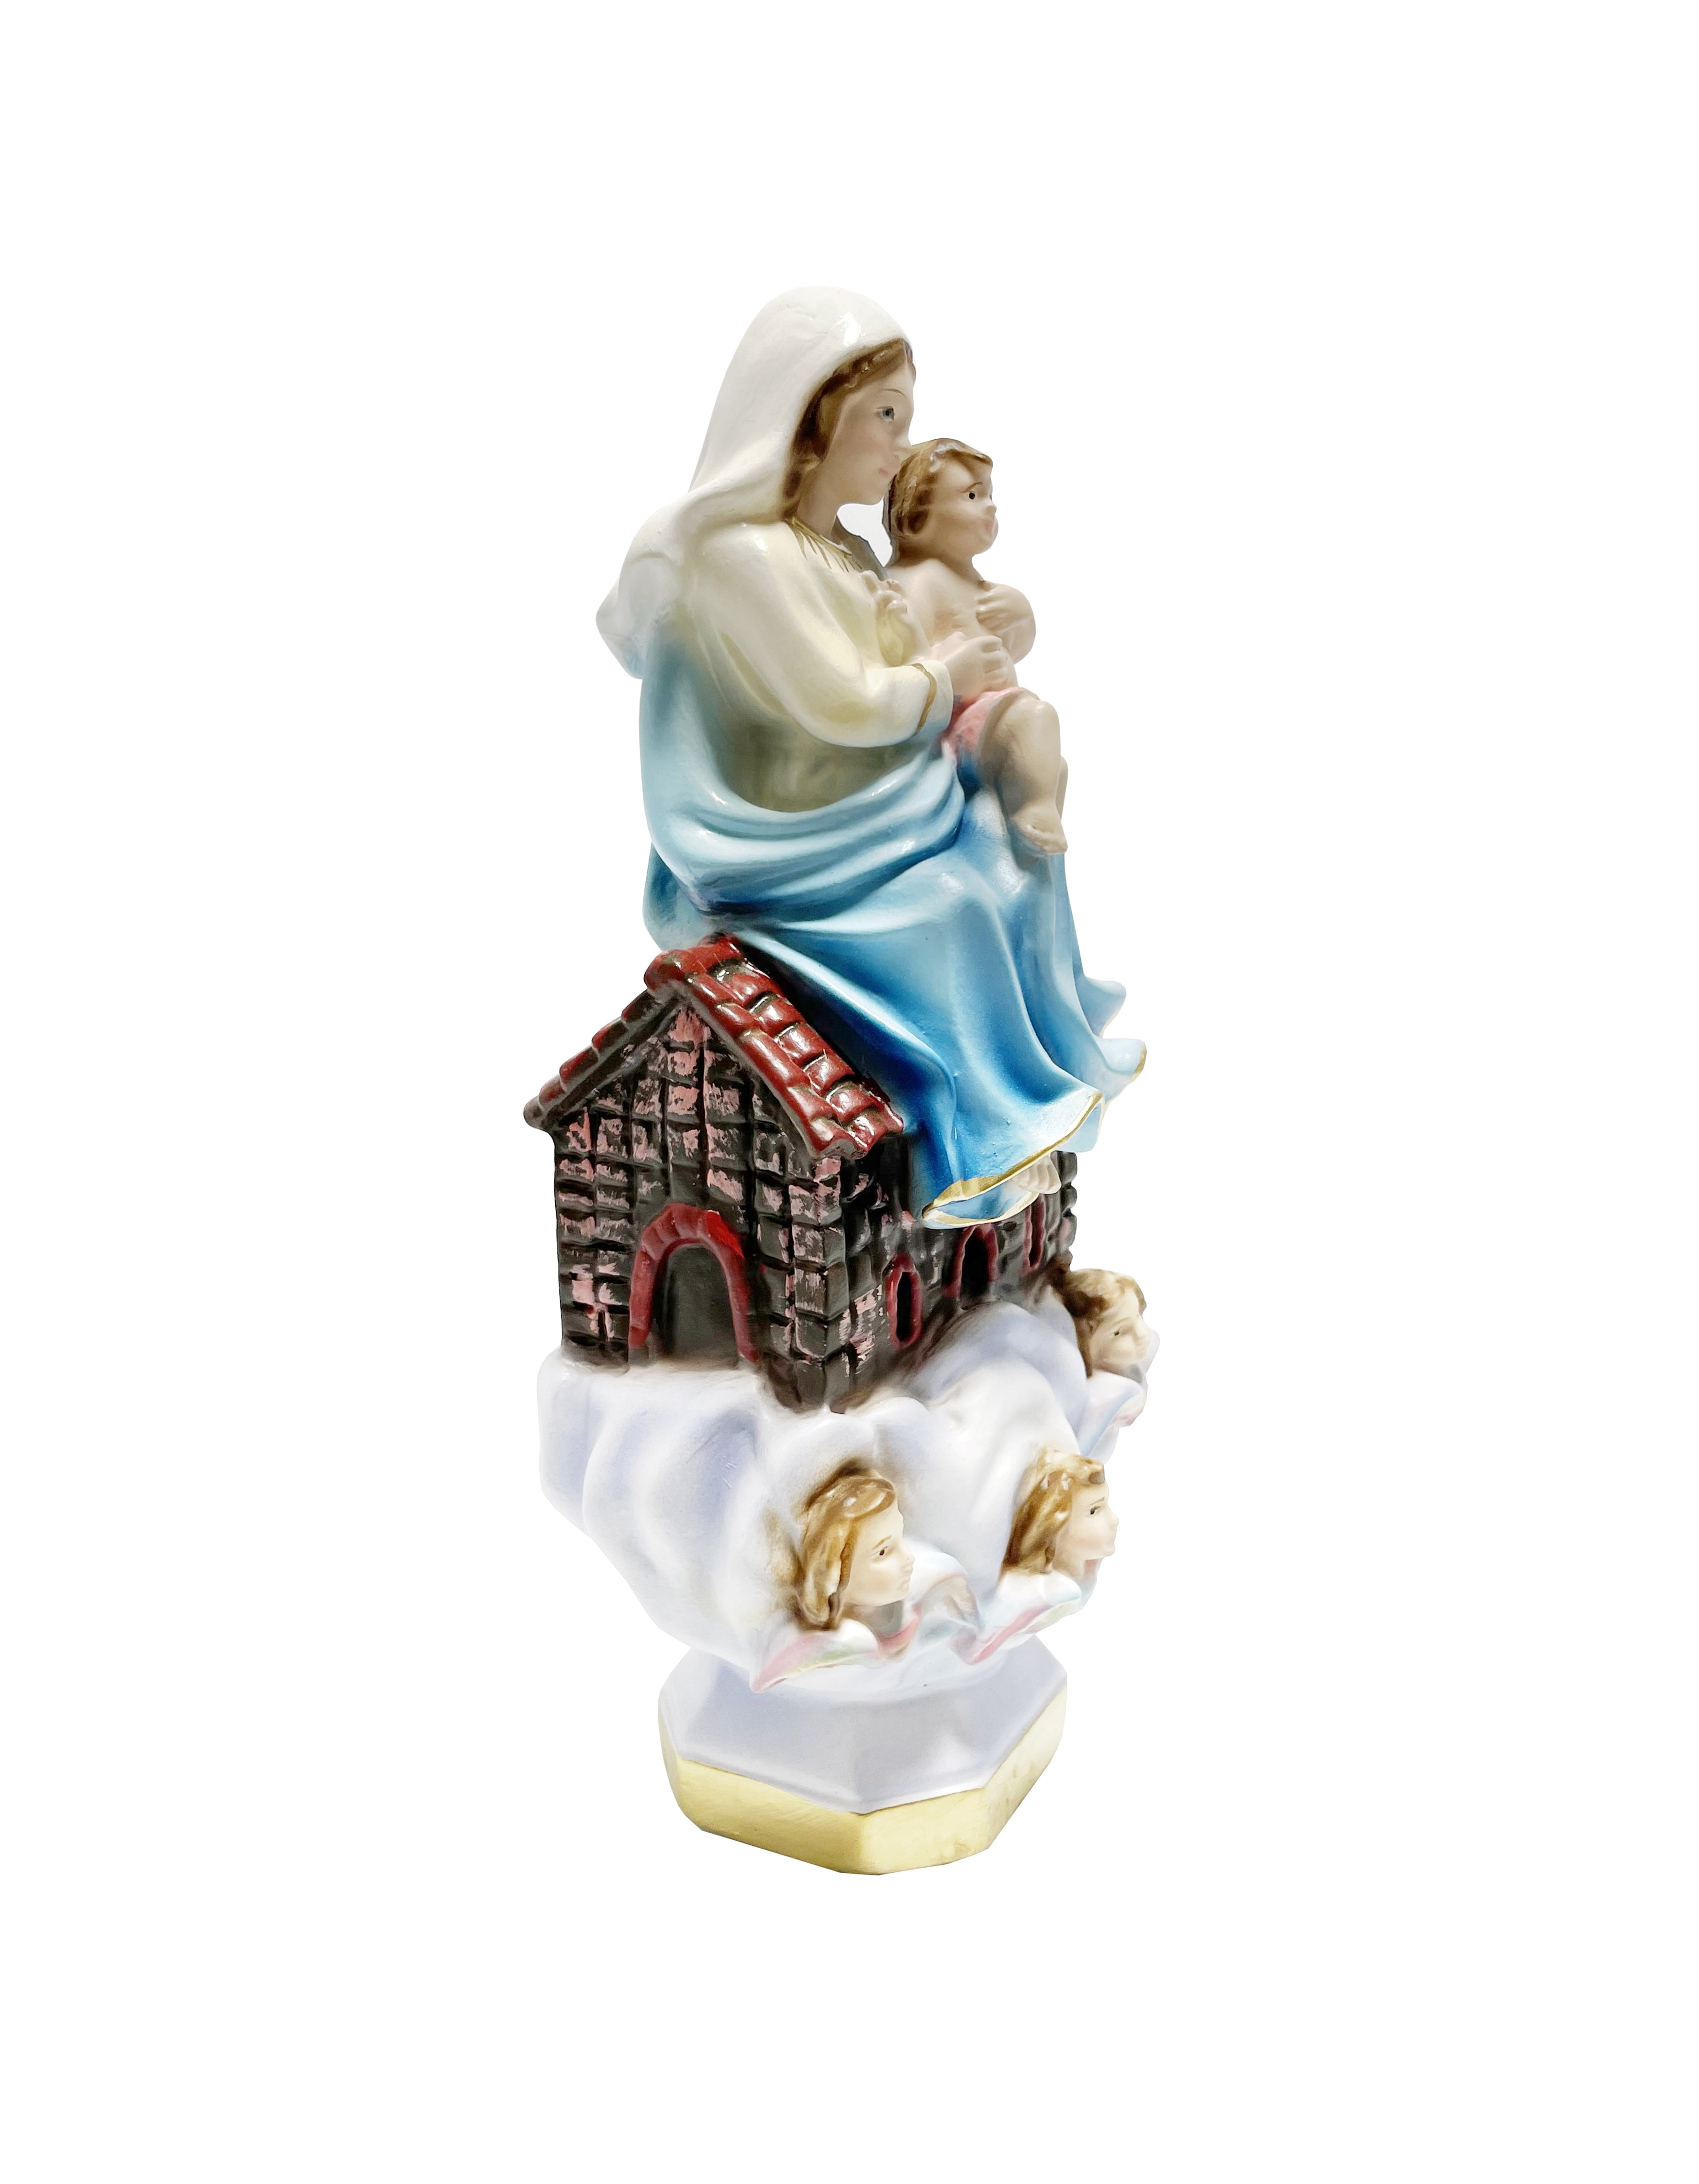 Religious statue of Our Lady of Loreto 9" height